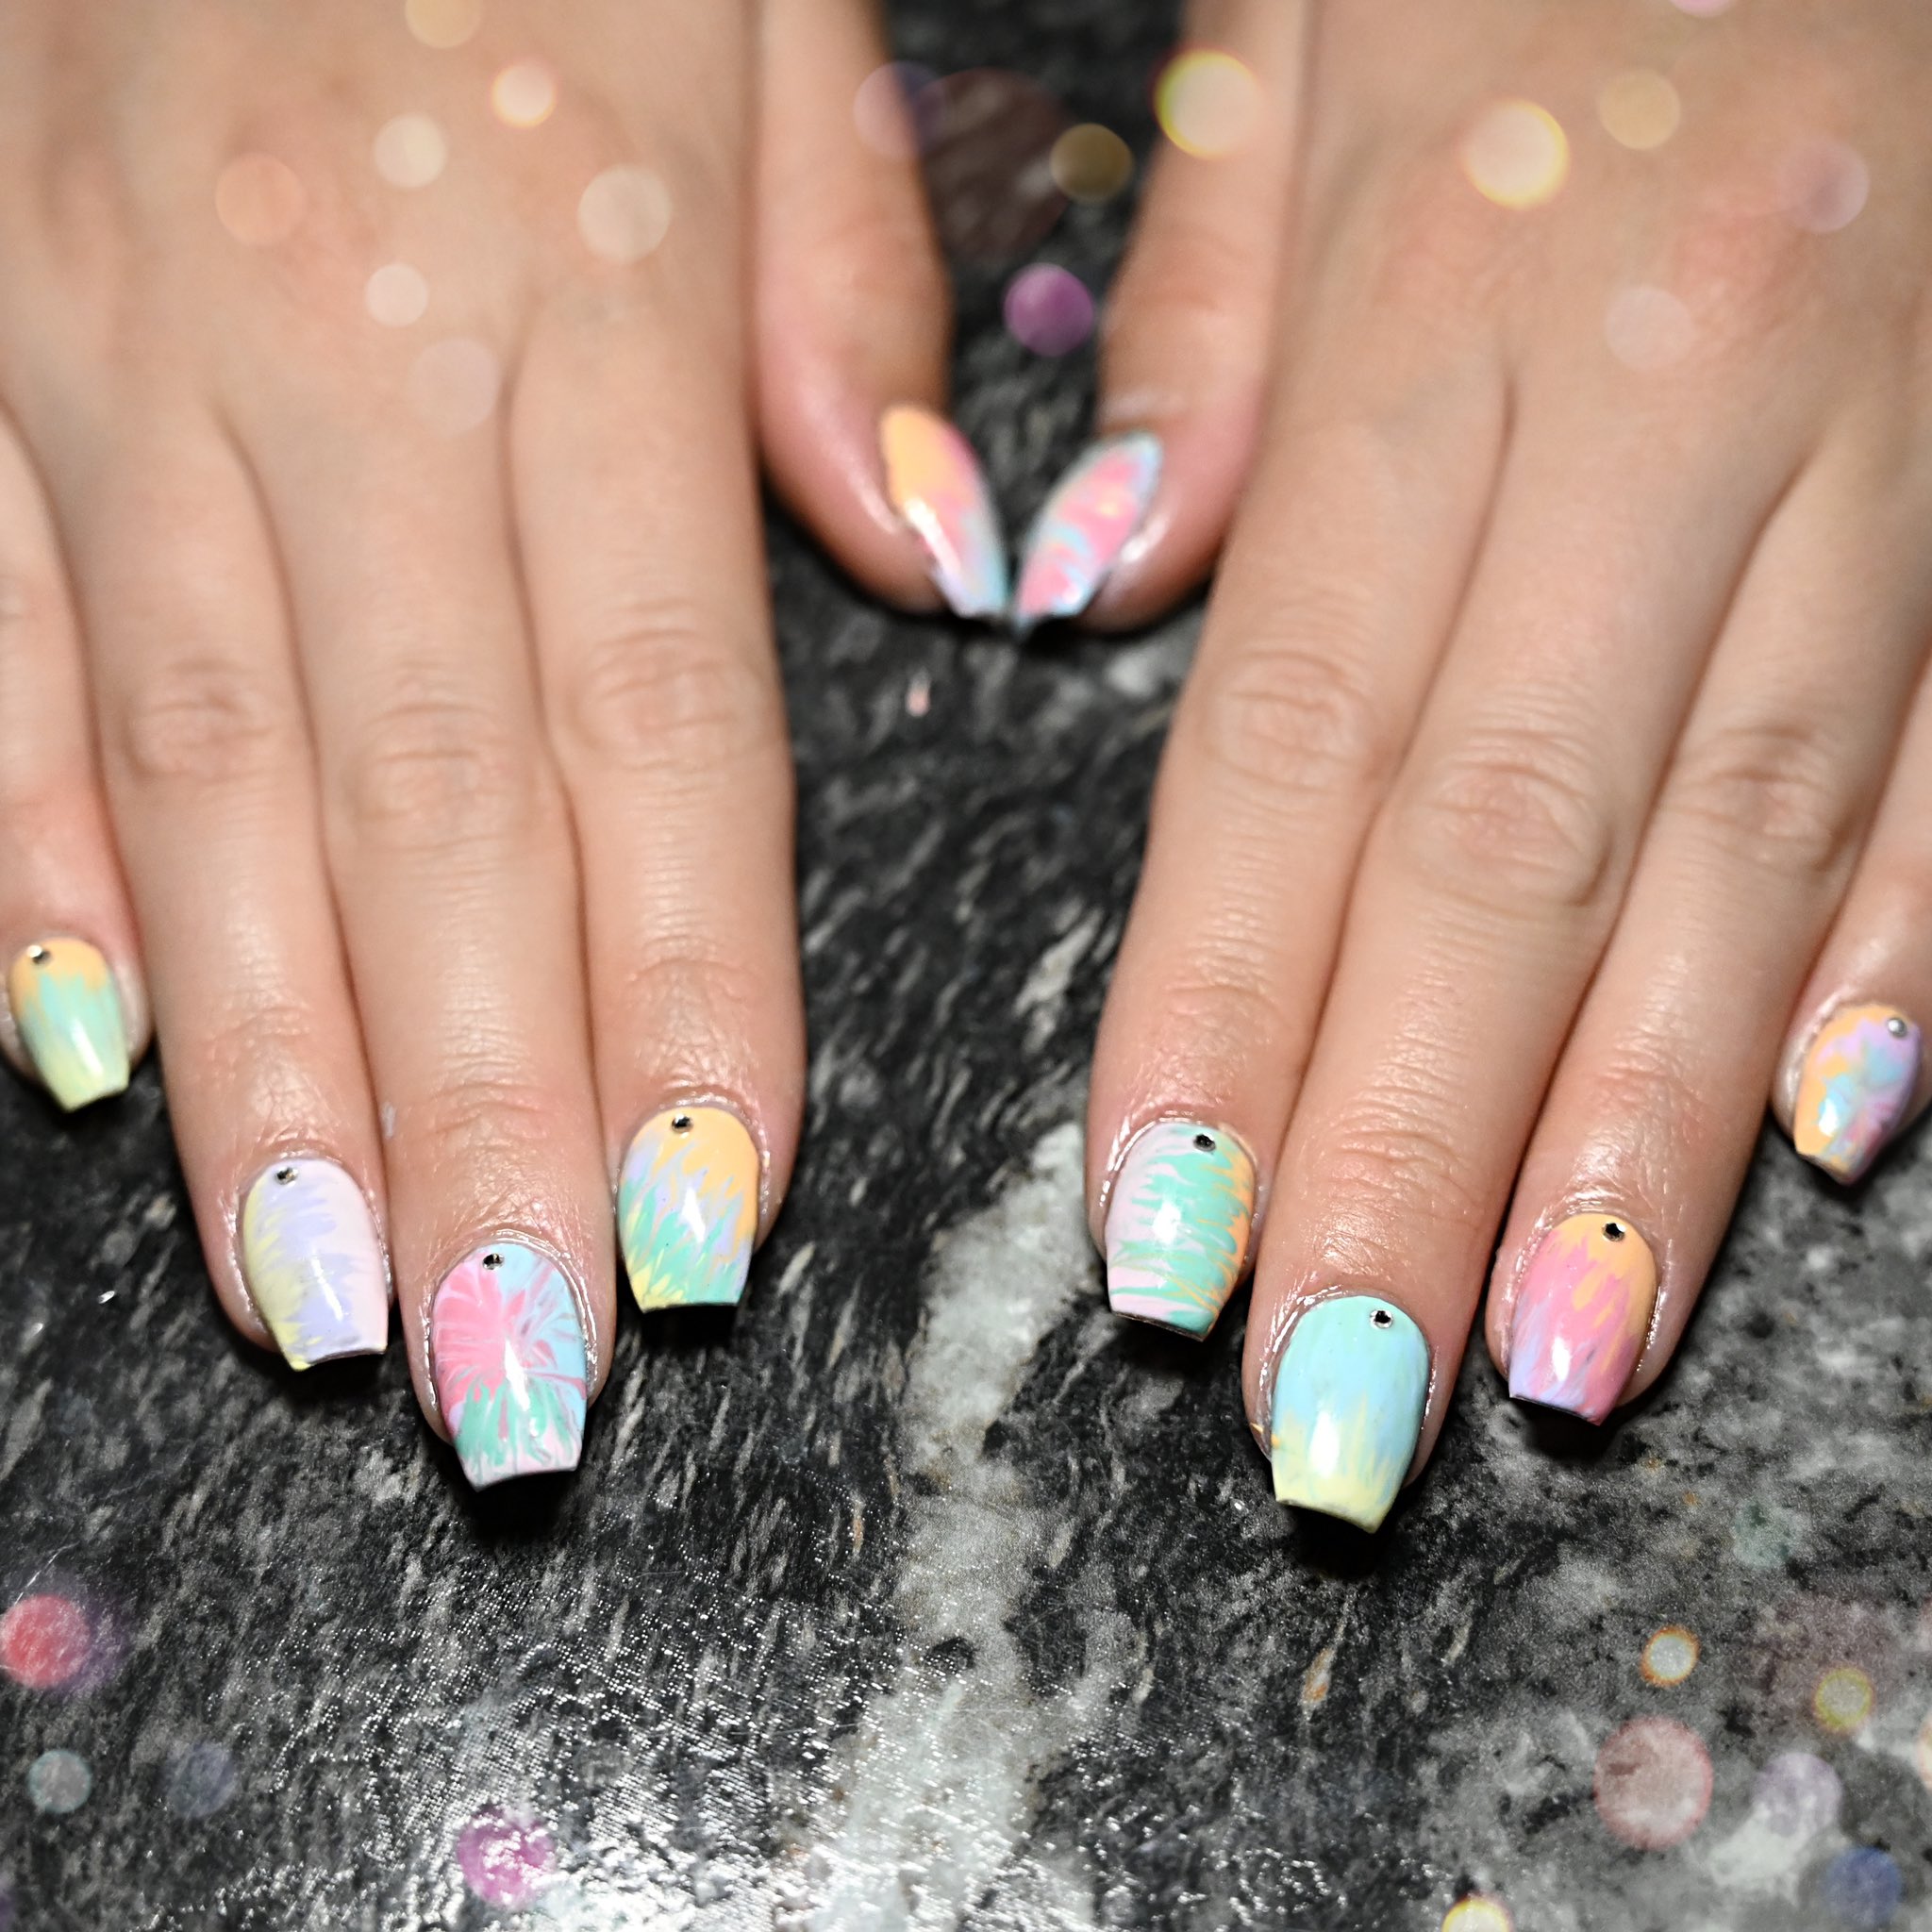 Tie-Dye Nail Art Is the Coolest Manicure Trend for Summer | Allure